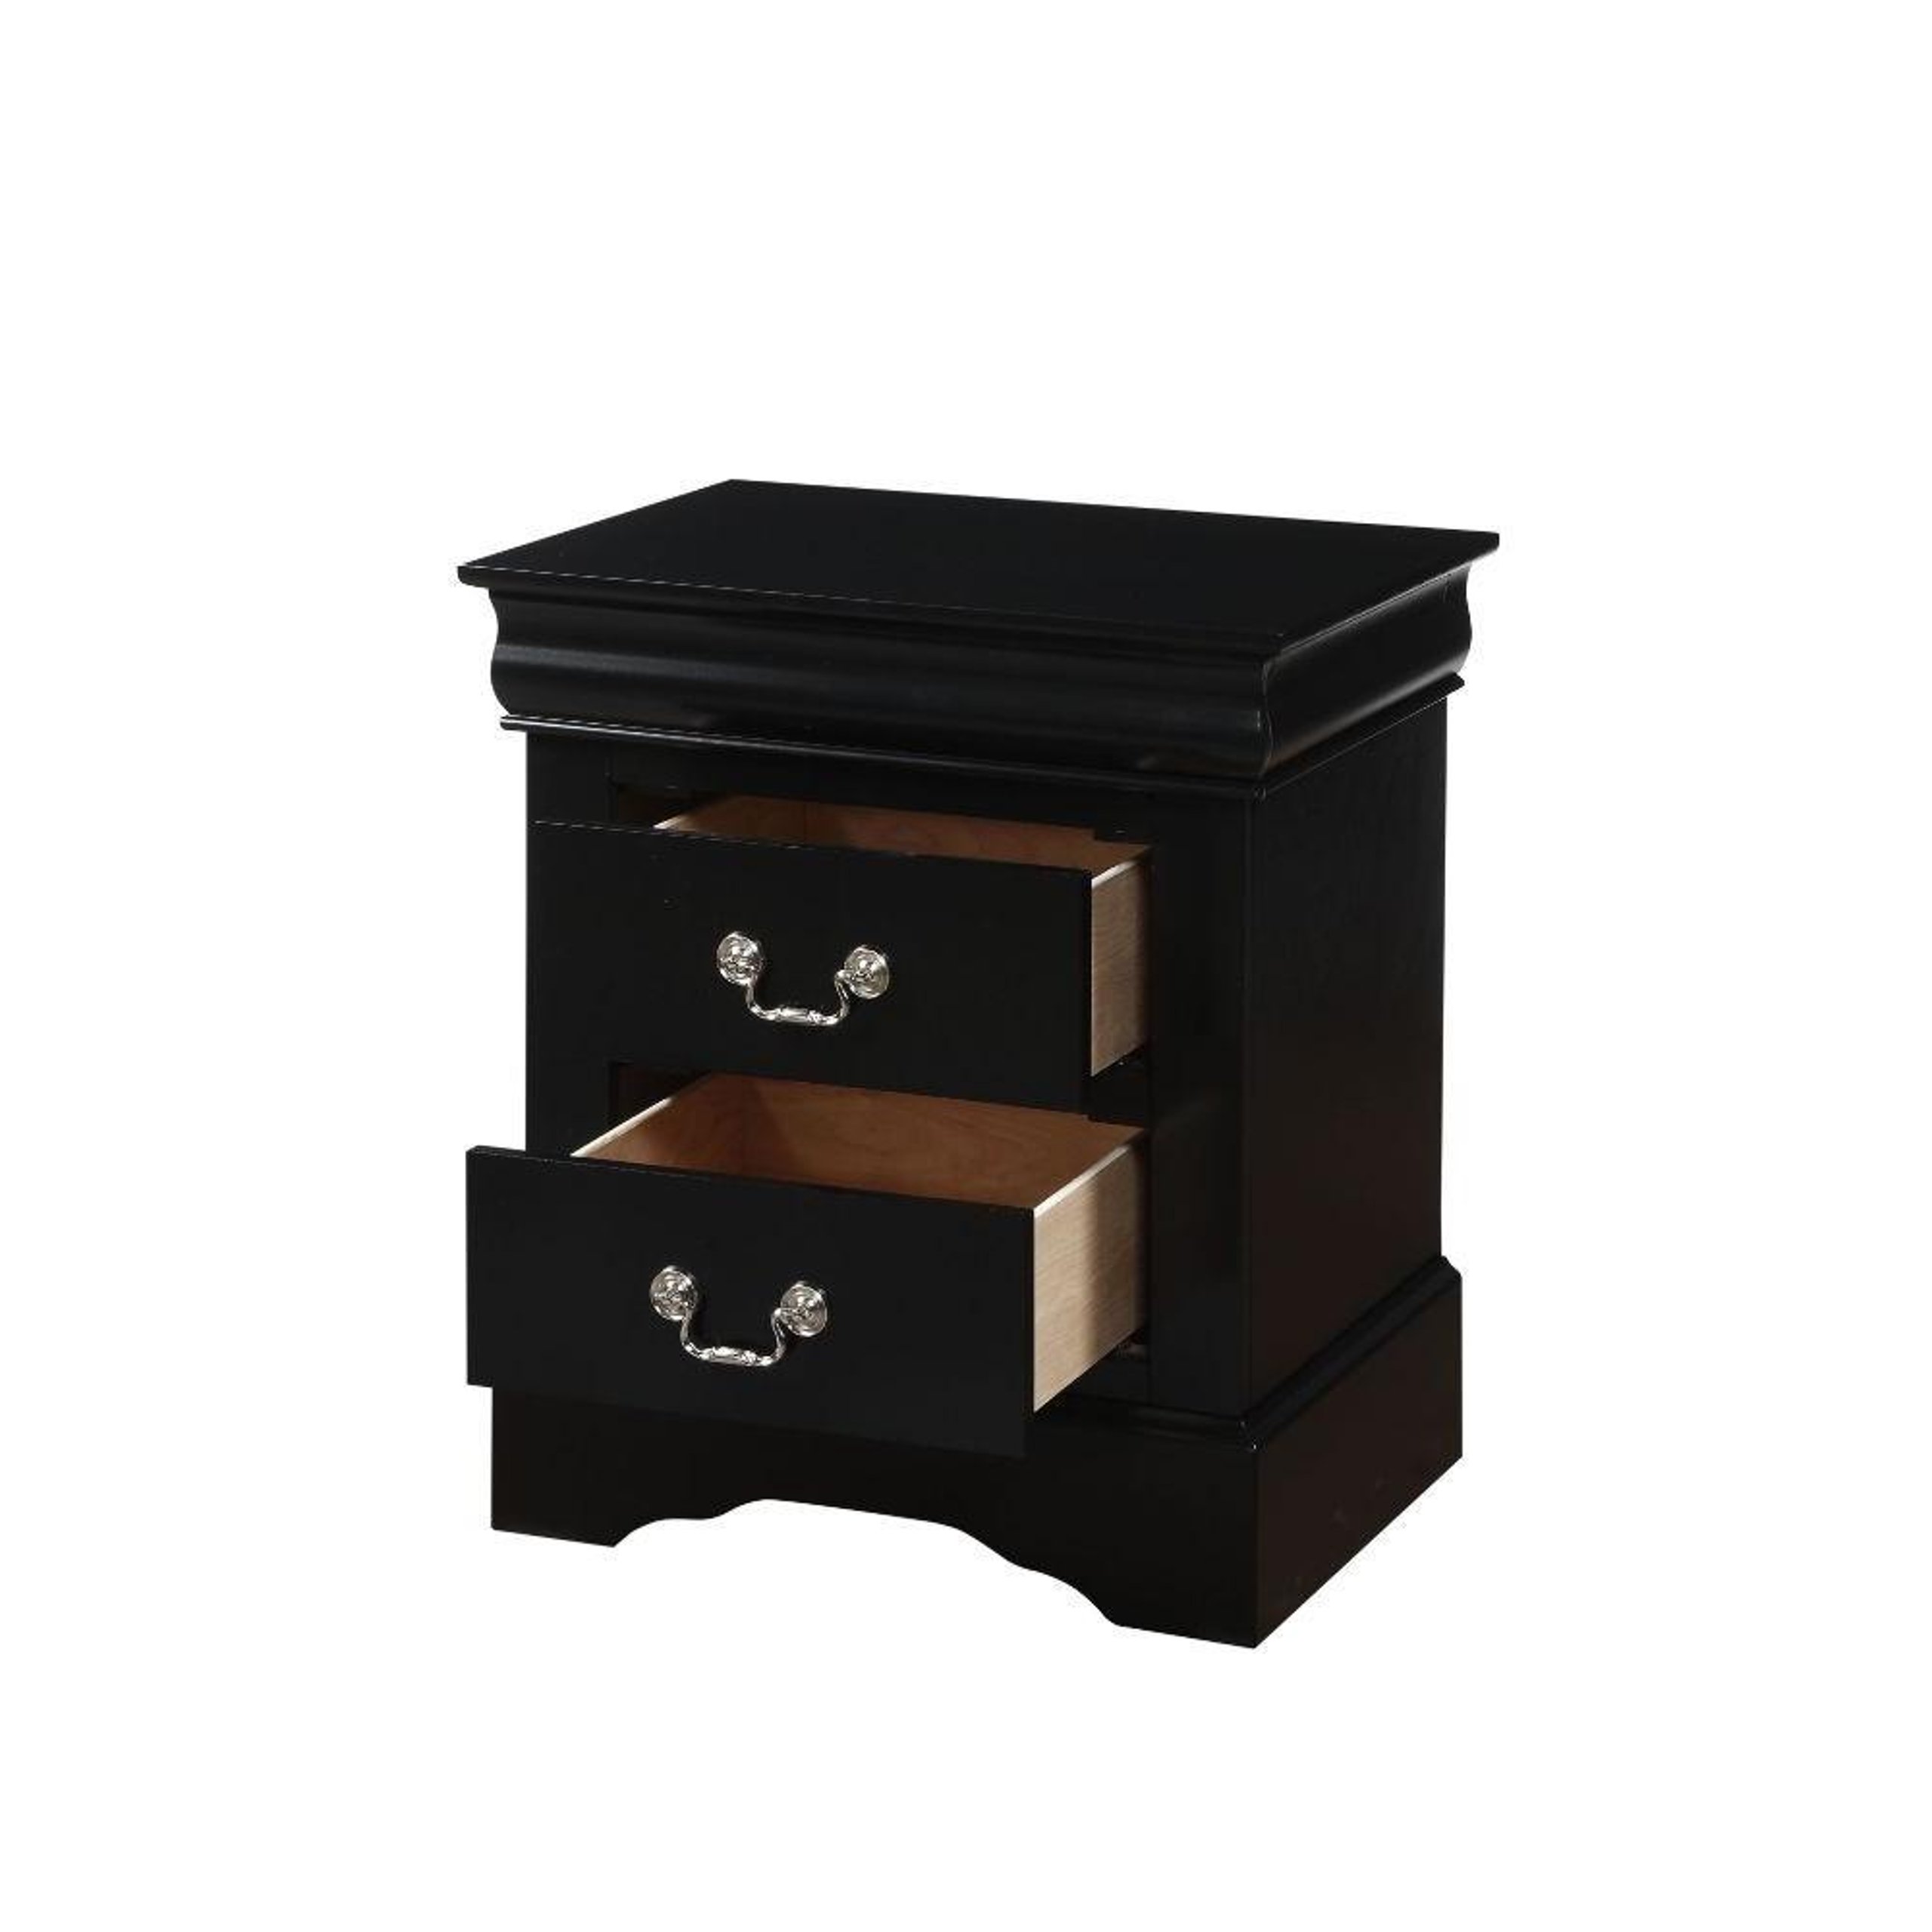 Contemporary Black Queen 5pcs Bedroom Set by Acme Louis Philippe III 19500Q-5pcs  – buy online on NY Furniture Outlet